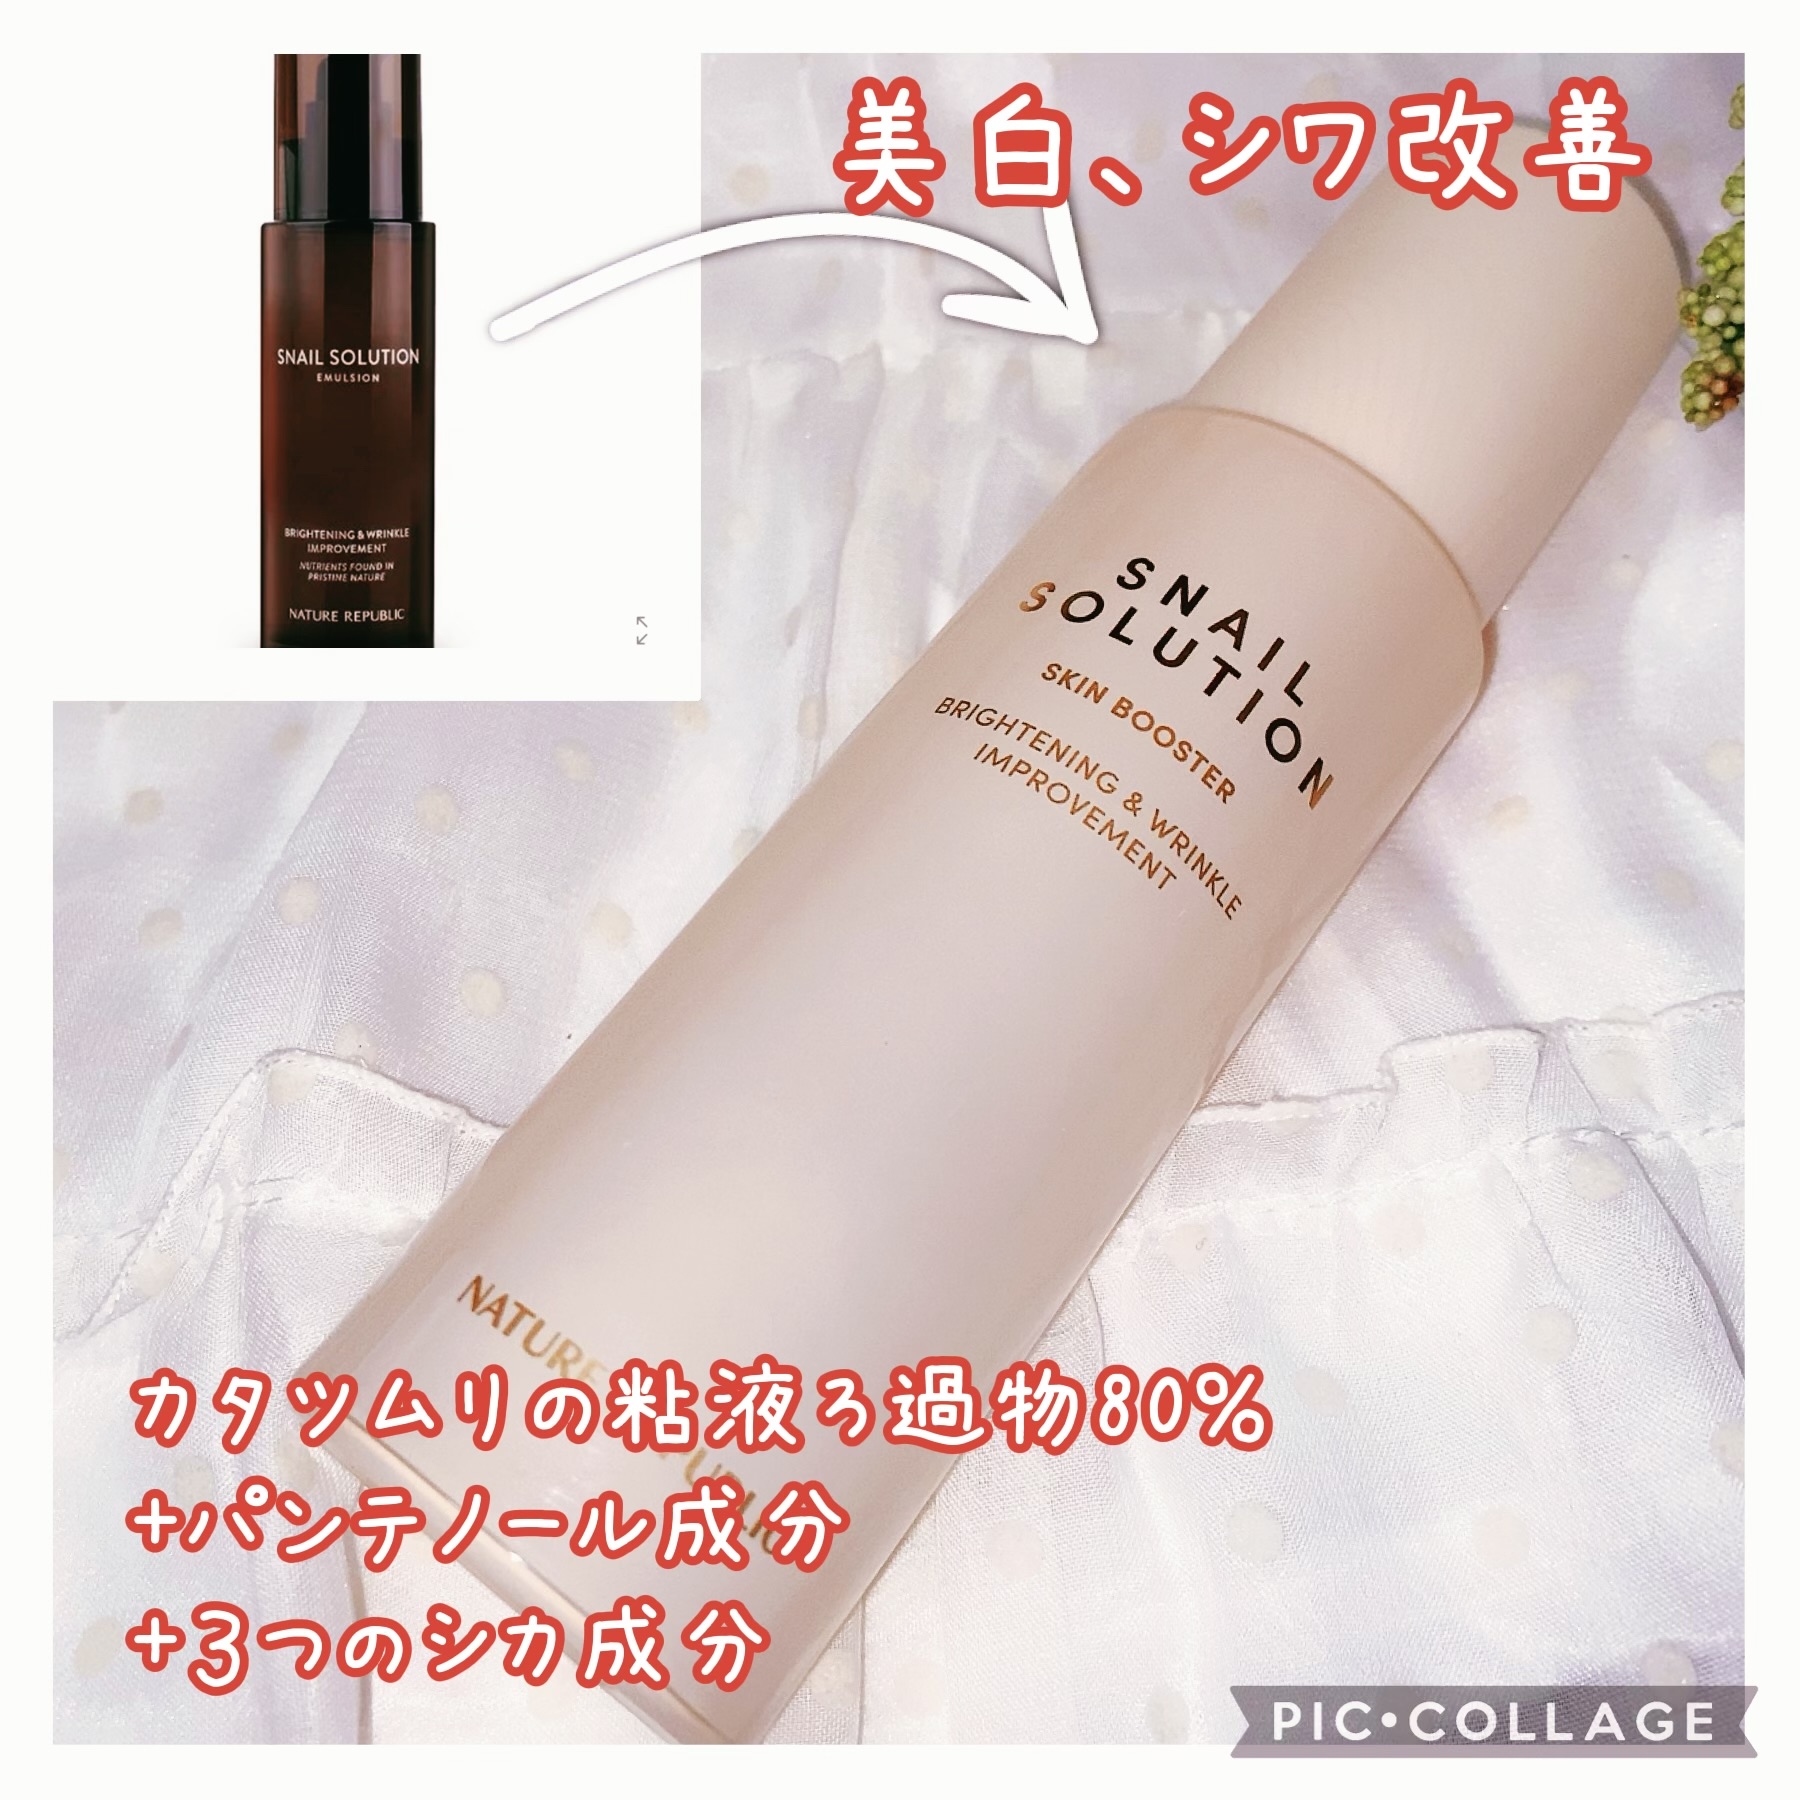 NATURE REPUBLIC SNAIL SOLUTION SKIN BOOSTERを使った珈琲豆♡さんのクチコミ画像4